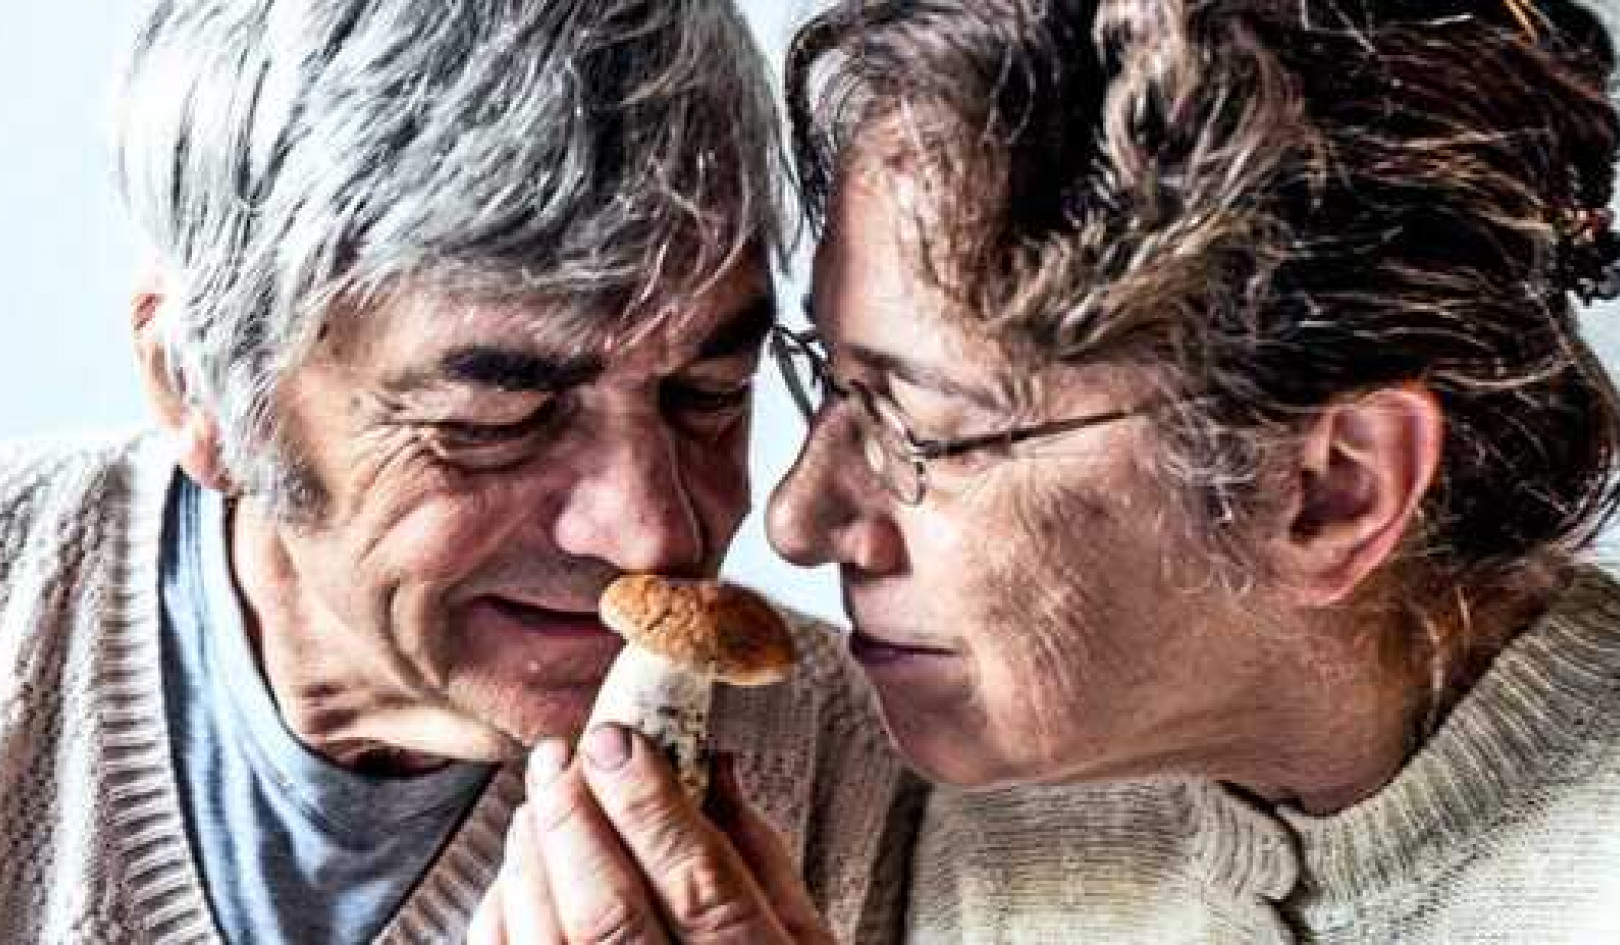 Older folks lose sense of smell for some things, but not others